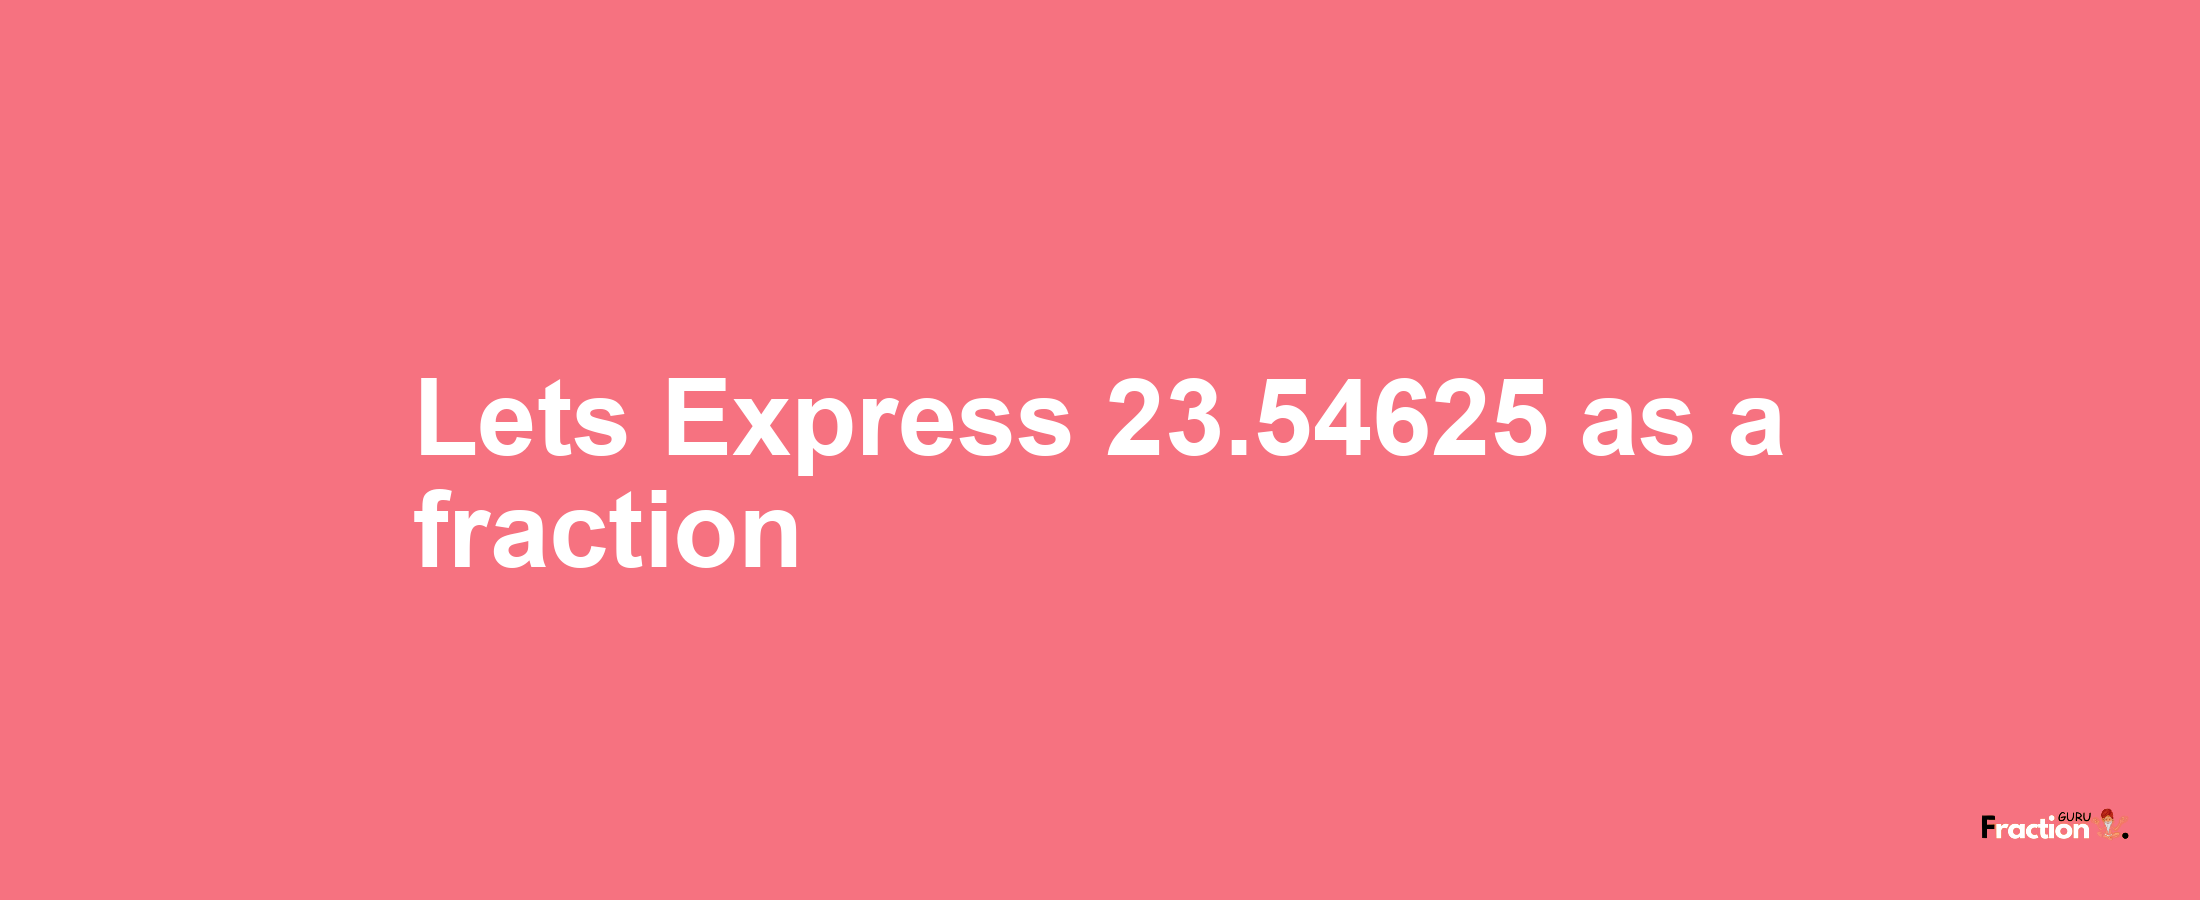 Lets Express 23.54625 as afraction